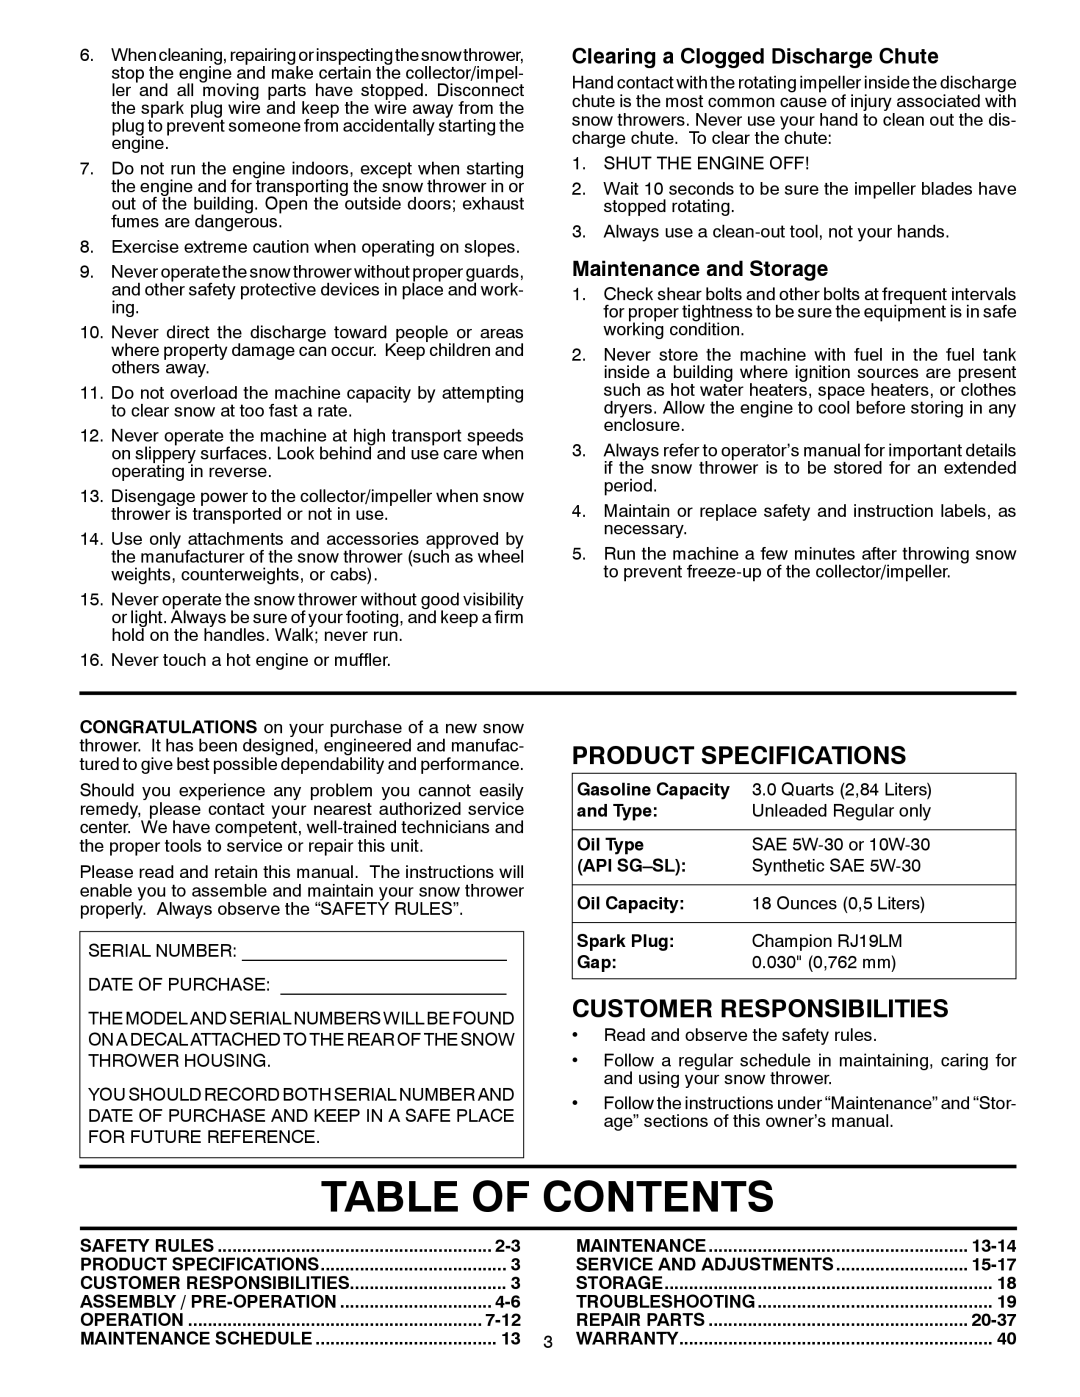 Poulan 428863 Table Of Contents, Product Specifications, Customer Responsibilities, Clearing a Clogged Discharge Chute 